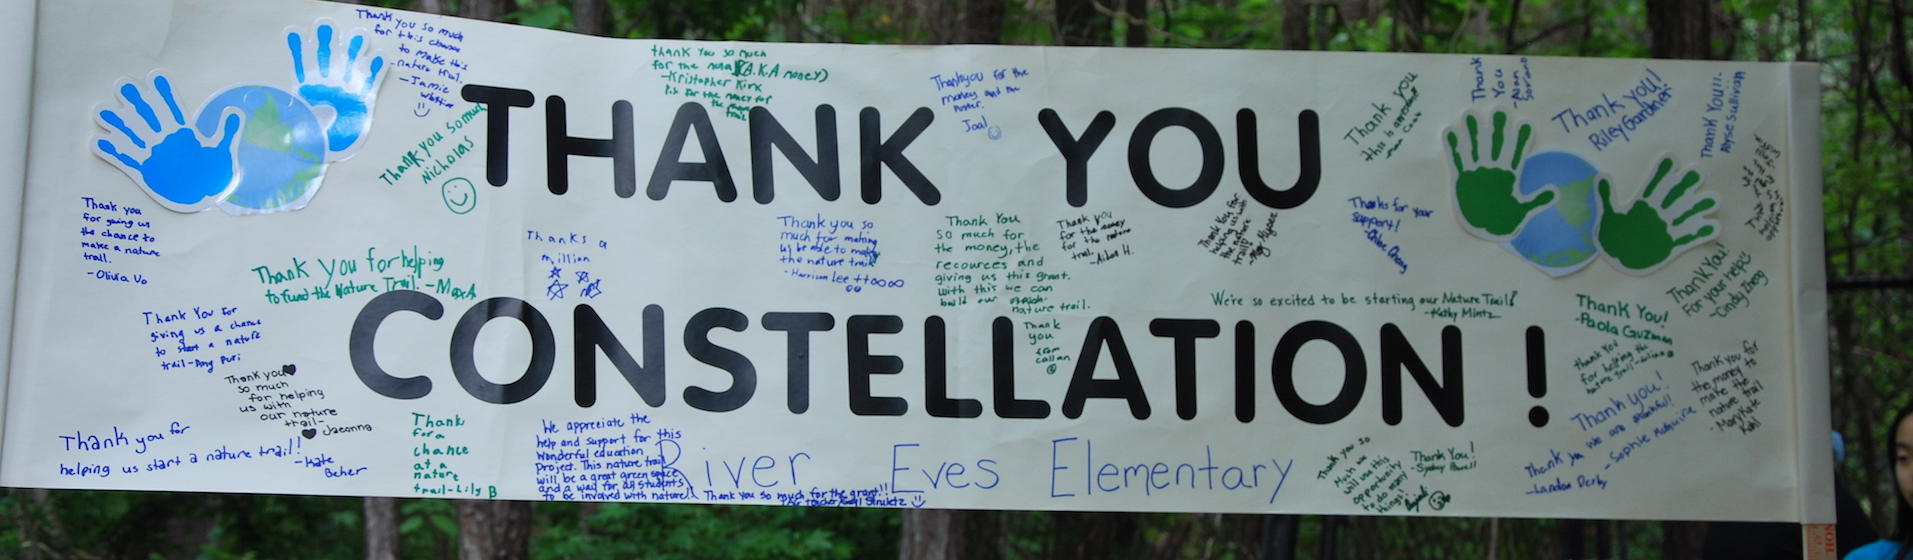 Banner saying Thank You Constellation for community giving